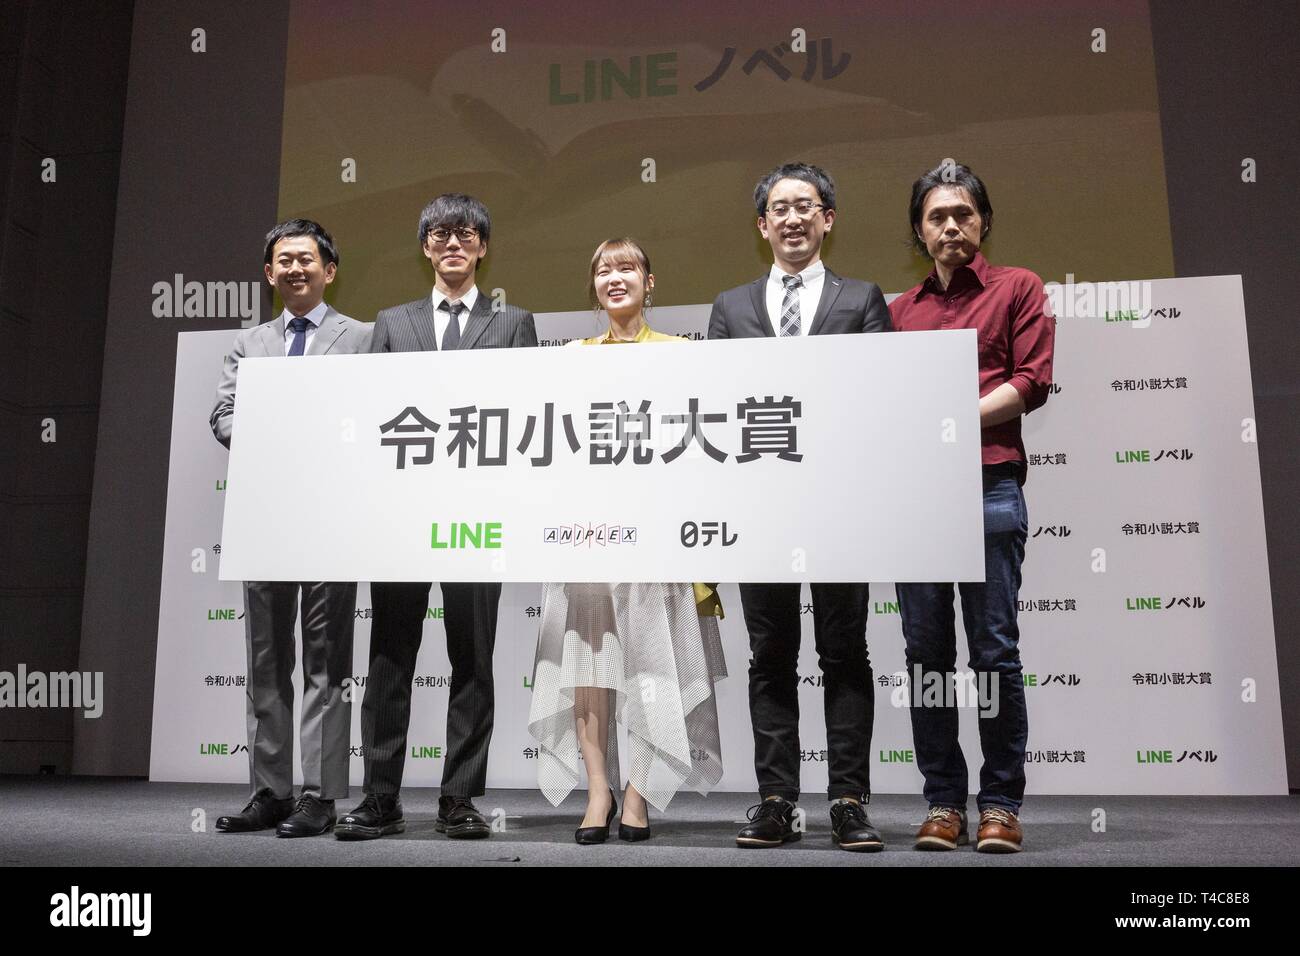 Tokyo, Japan. 16th Apr, 2019. (L to R) Hiroshi Mori Executive Officer of LINE Corp., Yuma Takahashi producer of Aniplex, Japanese idol Kazumi Takayama, Hiroyuki Ueno Producer of Nippon Television Network Corp. and Kazuma Miki CEO of Straight Edge Inc., pose for the cameras during a news conference to announce a new service Line Novel and the Reiwa Novel Award which aims users to participate on its first novel contest sending their creations through their app from April 16 to September 30. Credit: Rodrigo Reyes Marin/ZUMA Wire/Alamy Live News Stock Photo